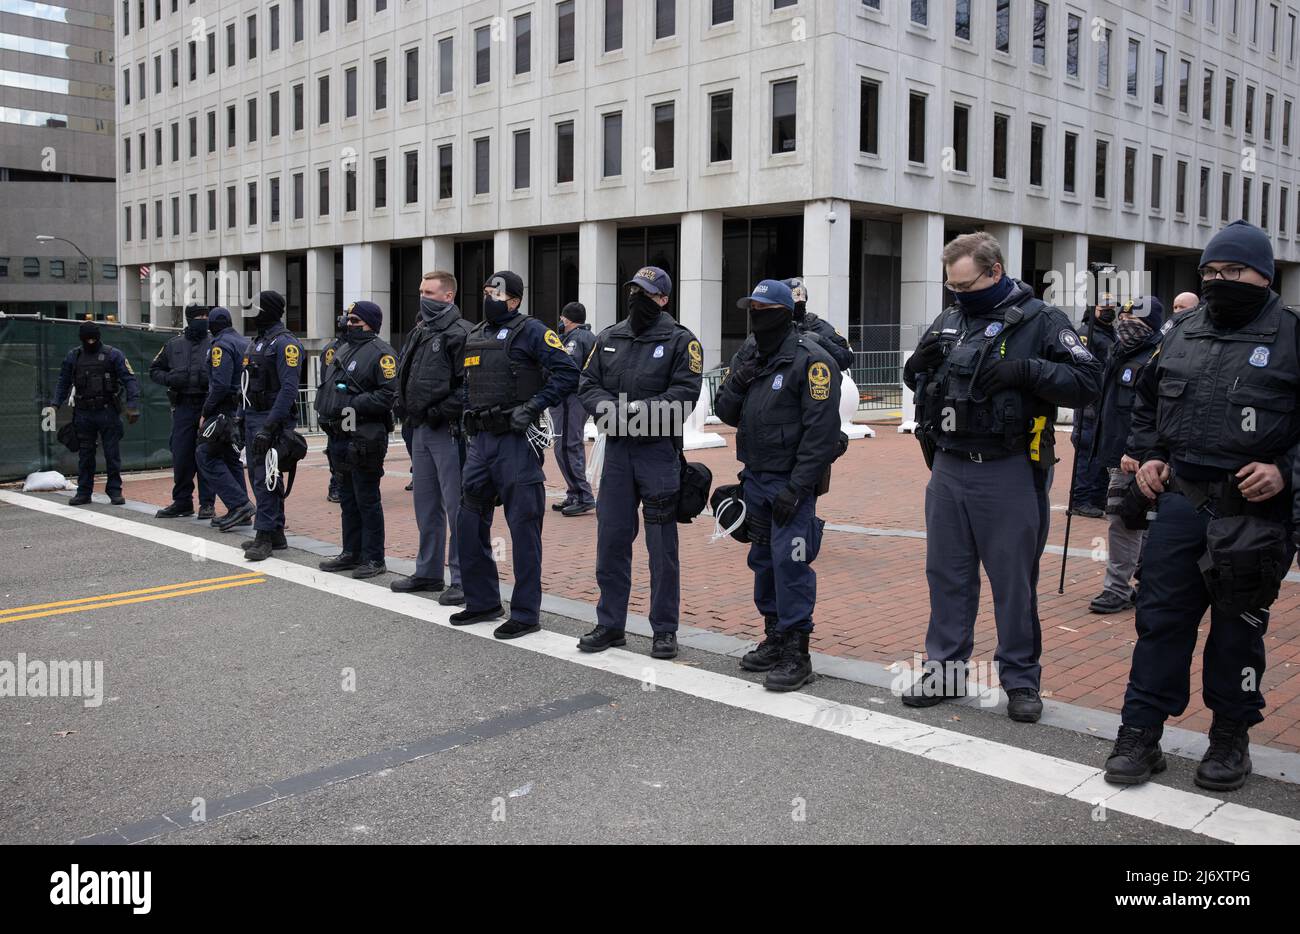 RICHMOND, VA – January 18, 2021: Virginia State Police officers are seen during a demonstration near Capitol Square in Richmond. Stock Photo